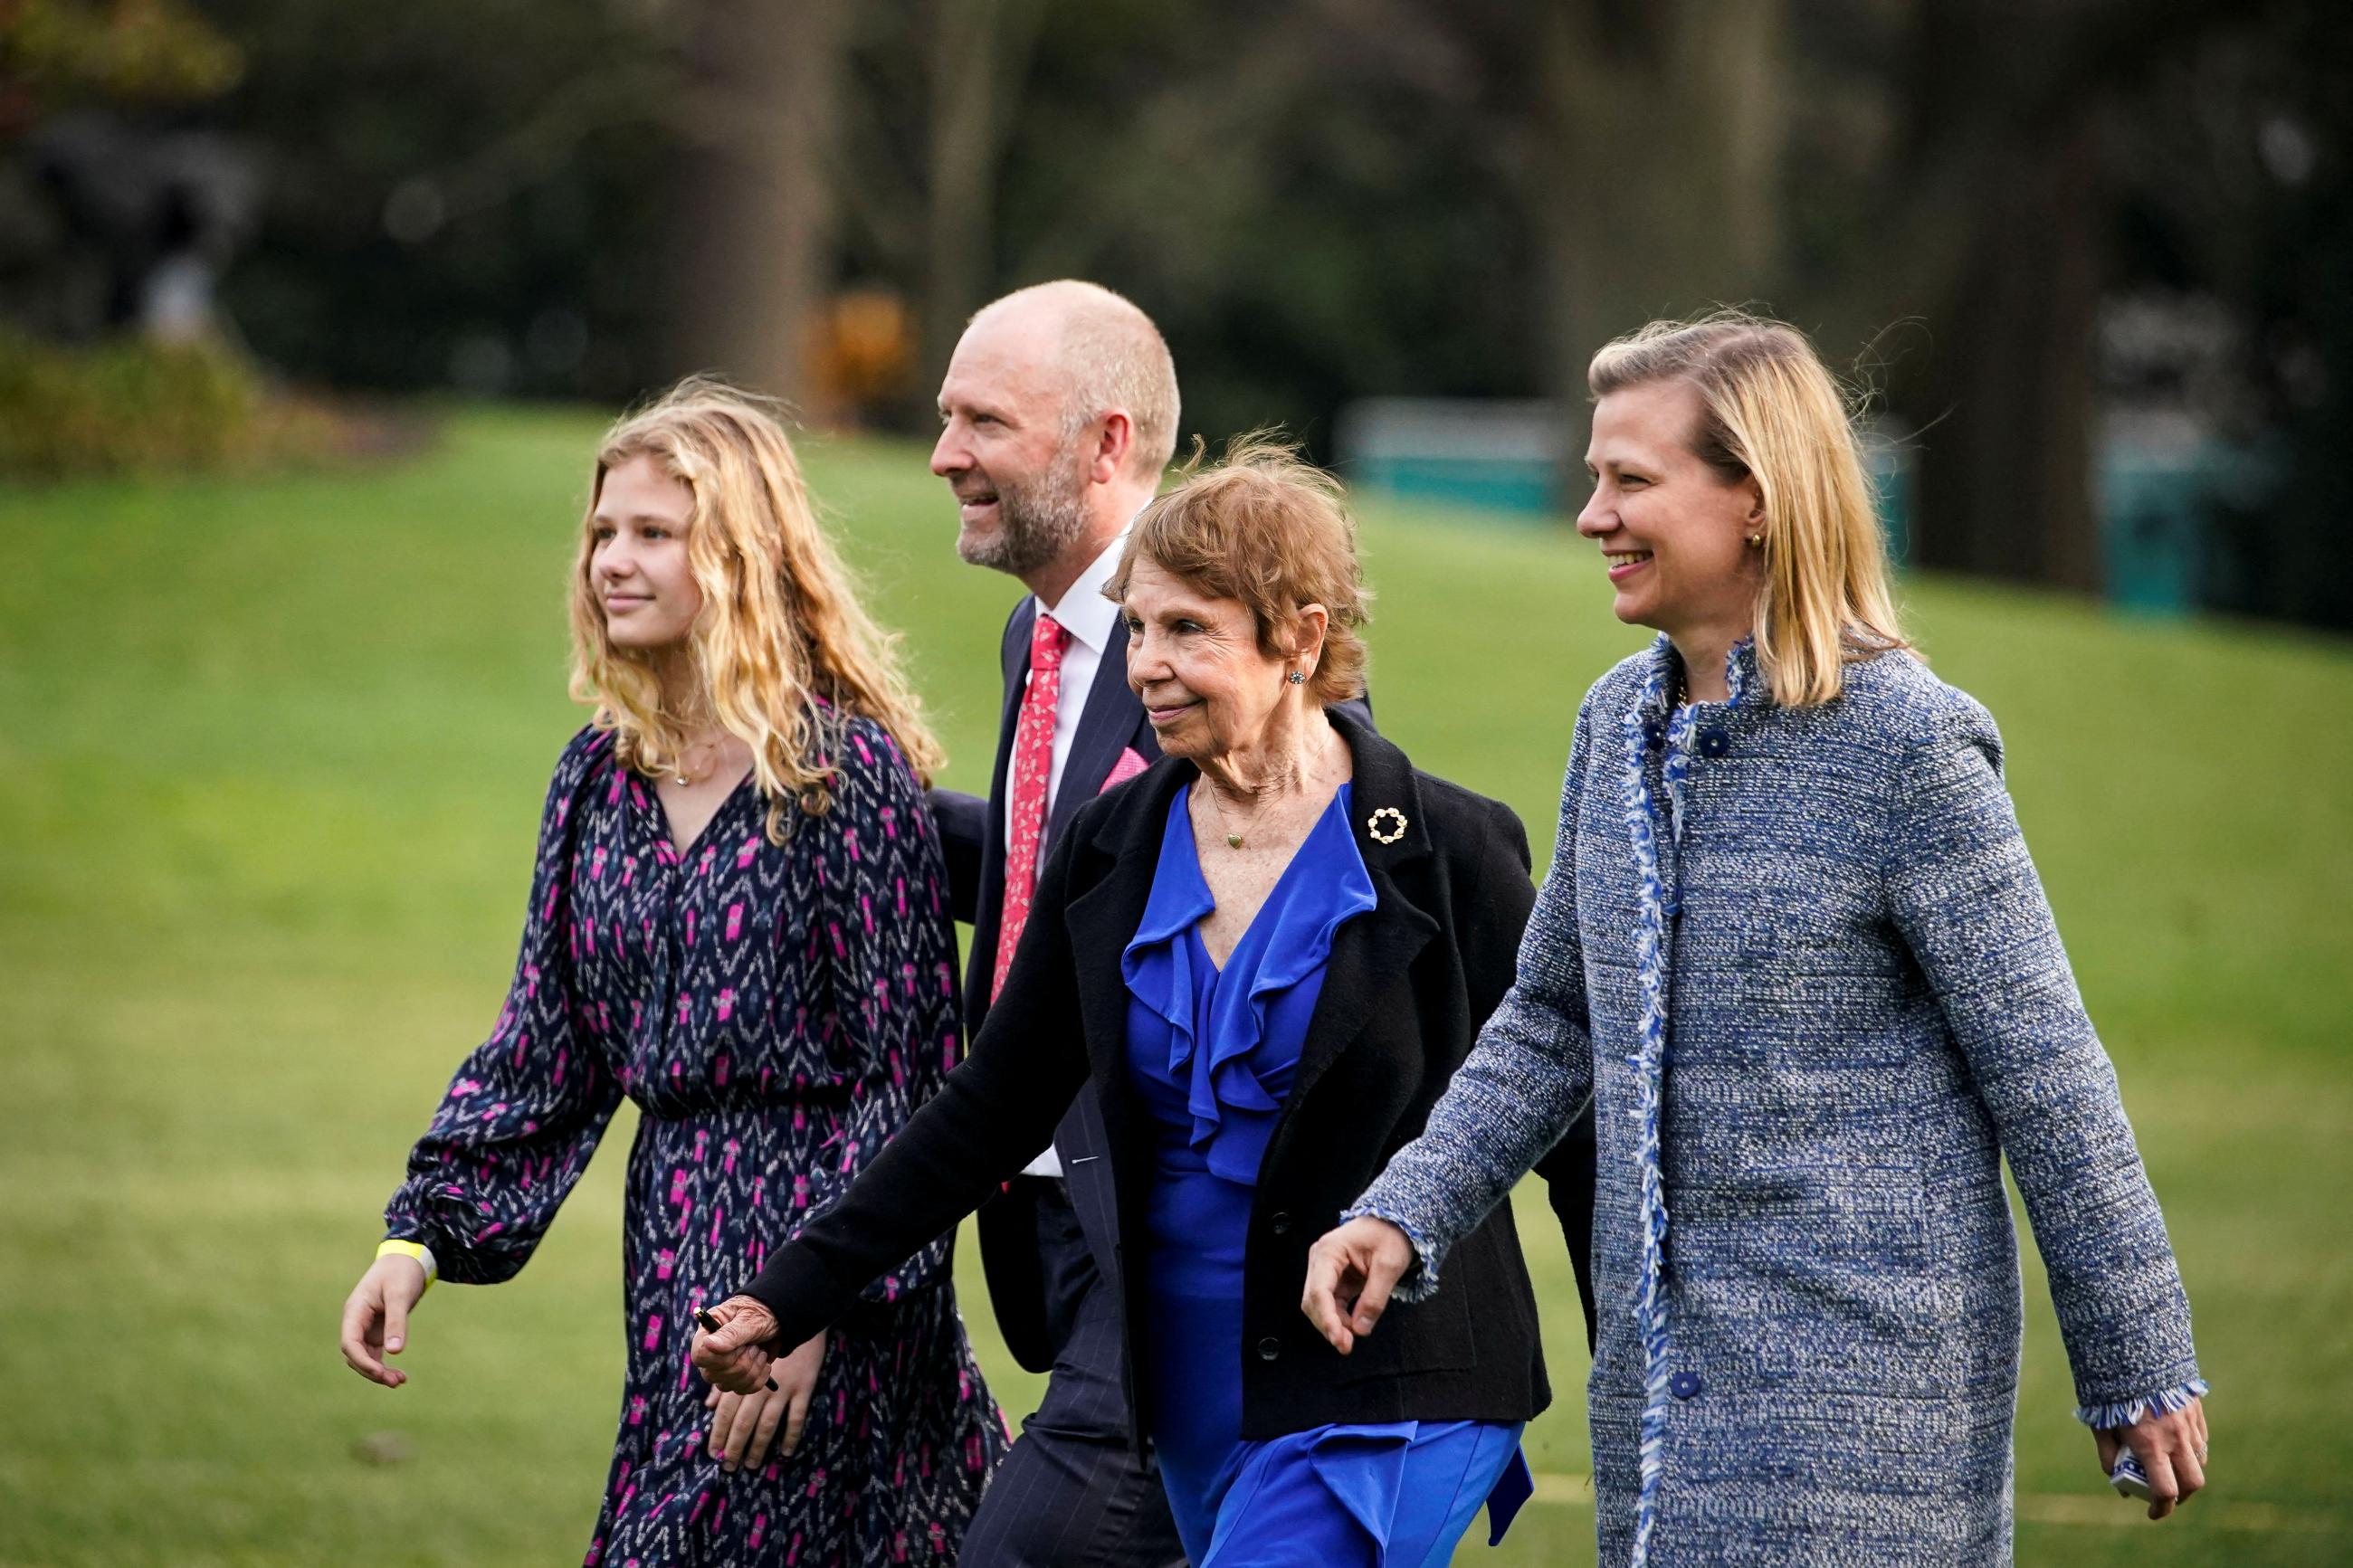 The family of Dr. Lorna Breen, who attended the bill signing of the Dr. Lorna Breen Health Care Provider Protection Act, on the South Lawn of the White House in Washington, DC, on March 18, 2022.  